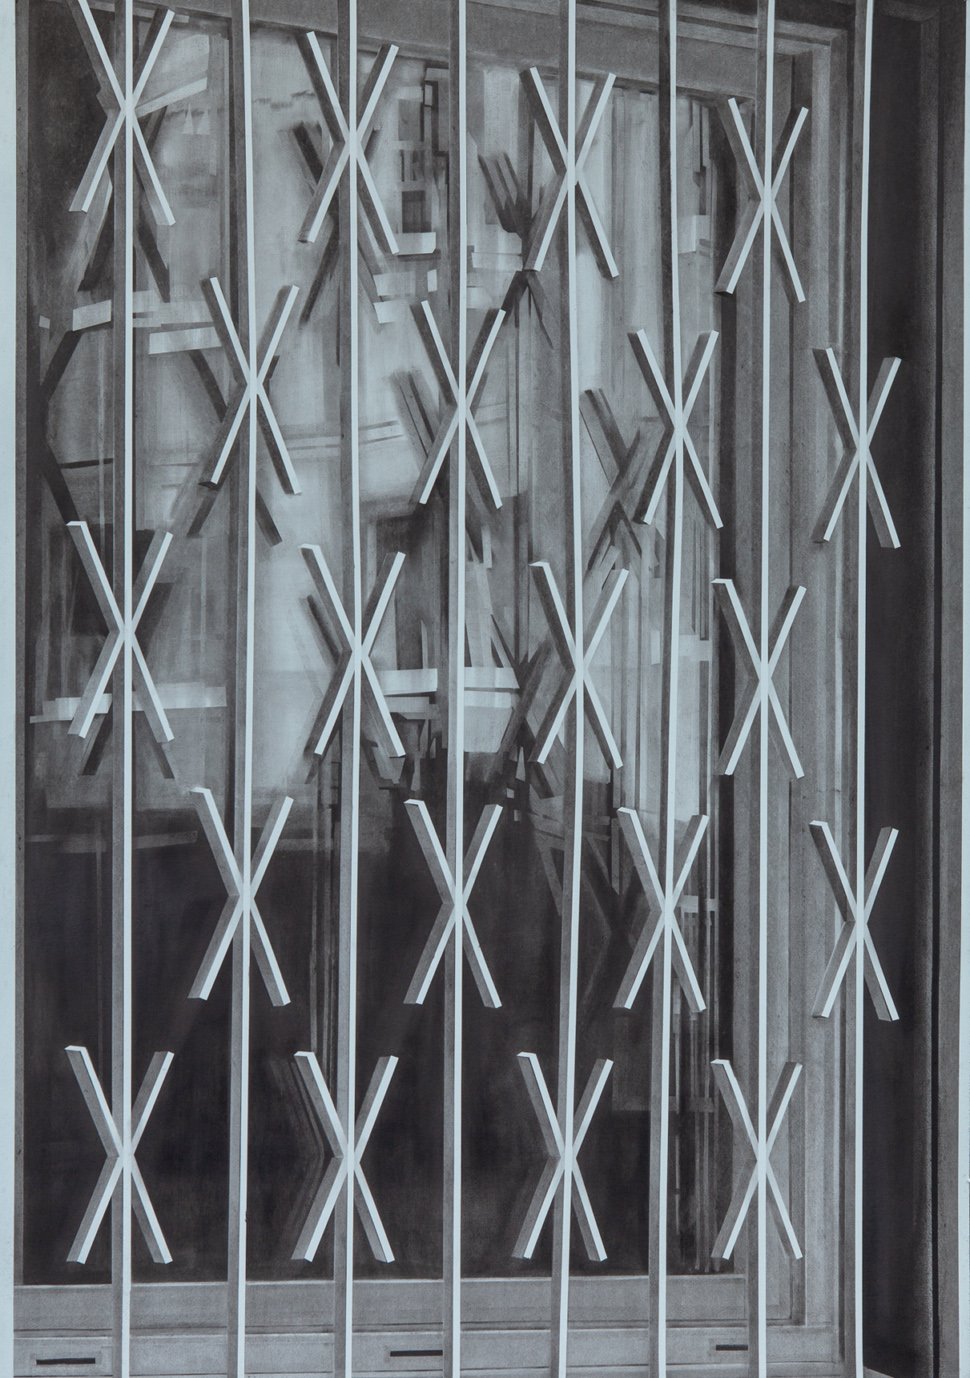  Grid Crossfence, 2019, charcoal on paper, 100 x 70 cm 